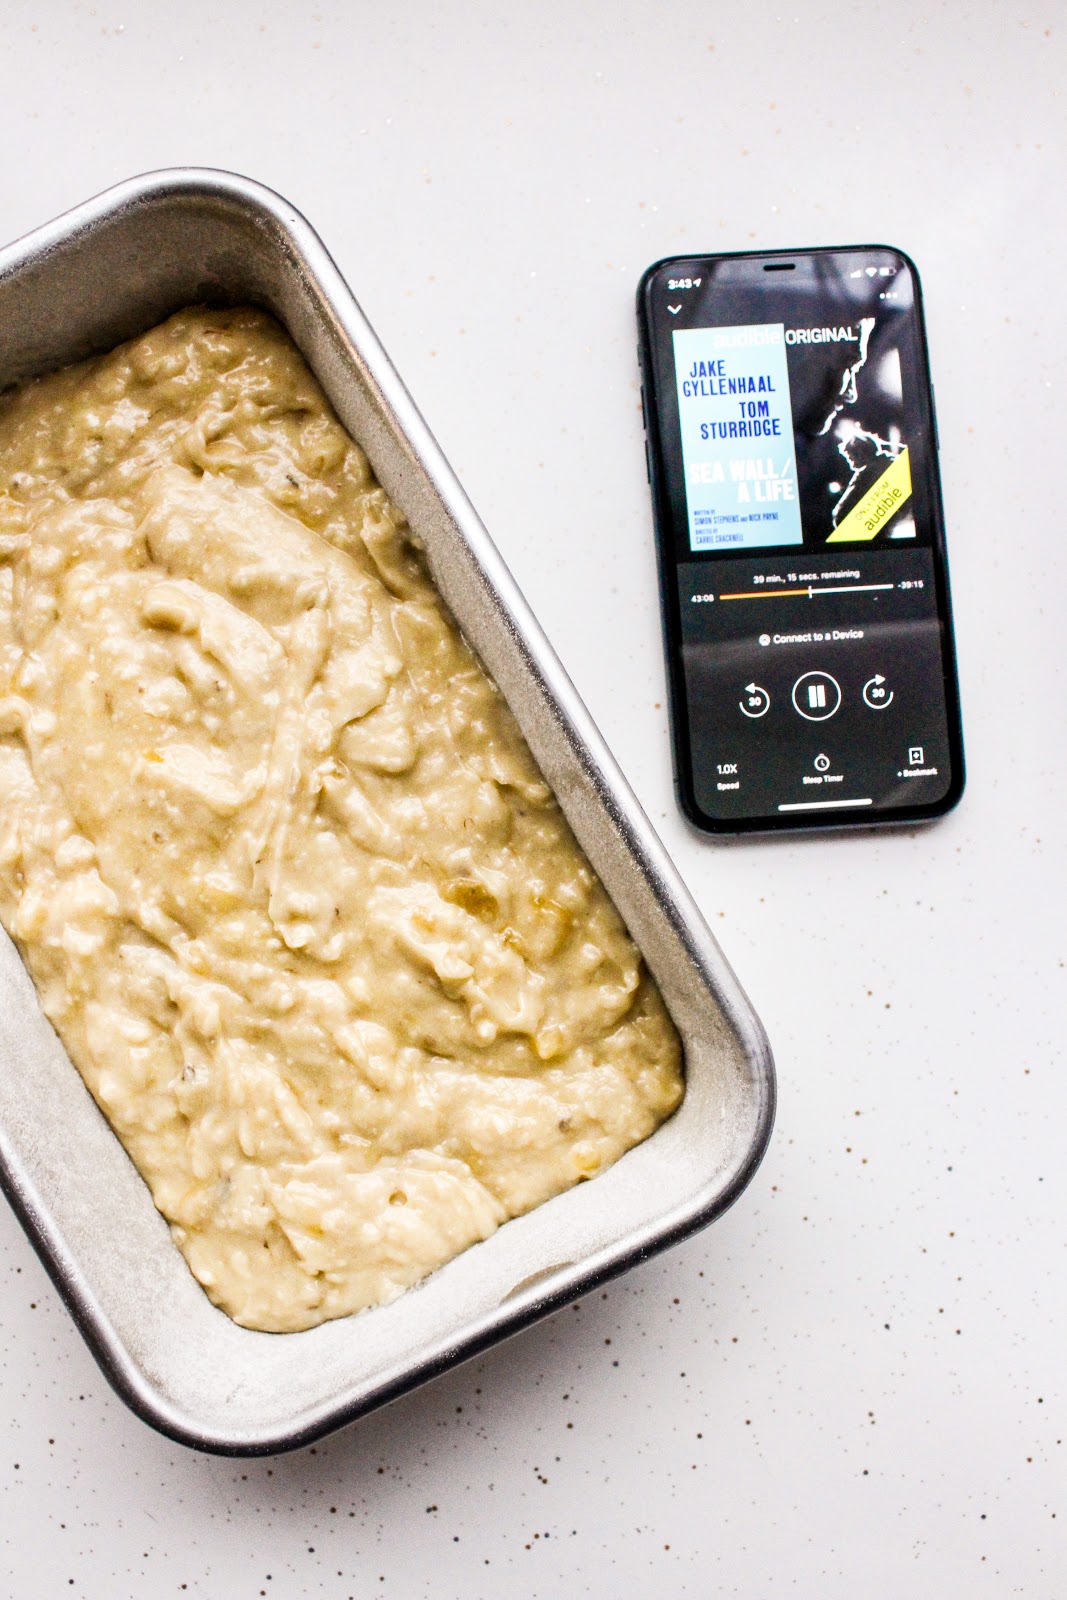 Audio book playing on a phone next to a loaf pan filled with banana bread batter.